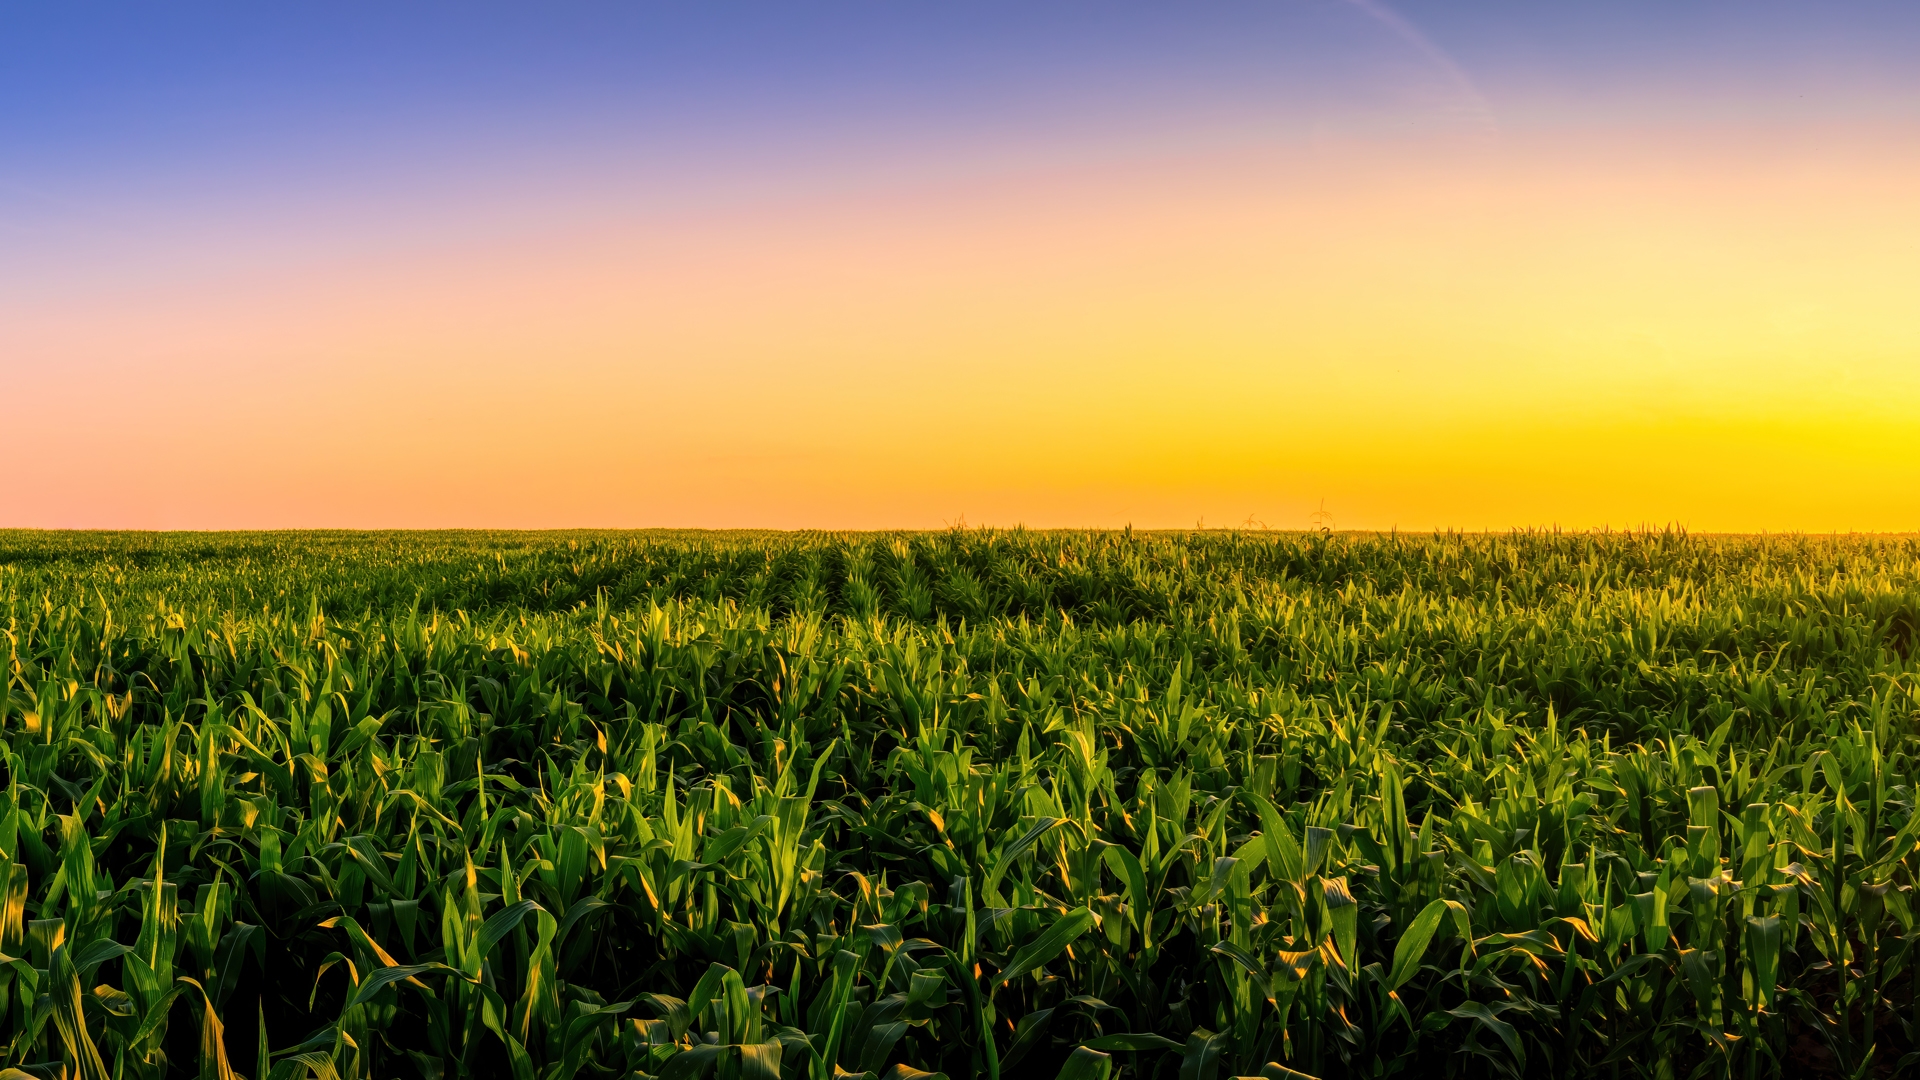 Rows of young corn in an agricultural field at sunset or sunrise